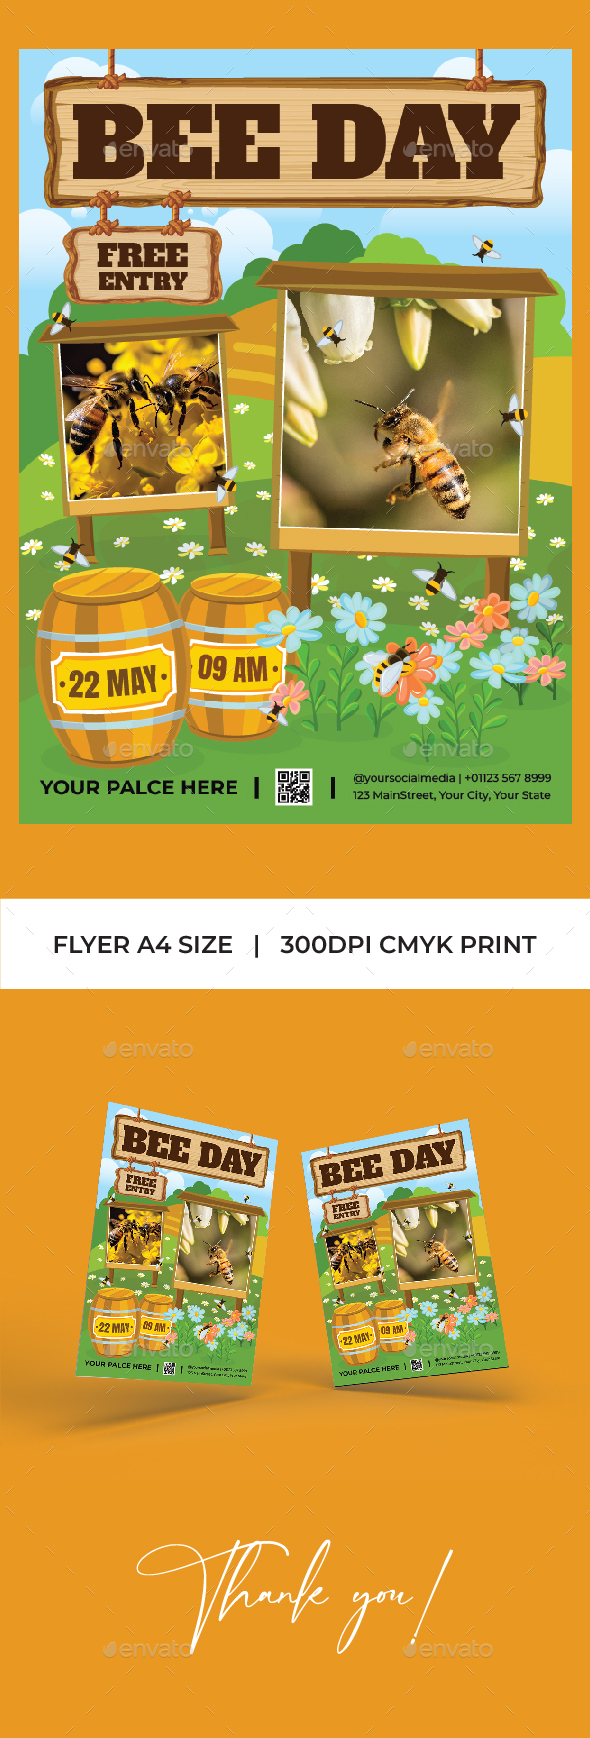 [DOWNLOAD]Bee Day Flyer